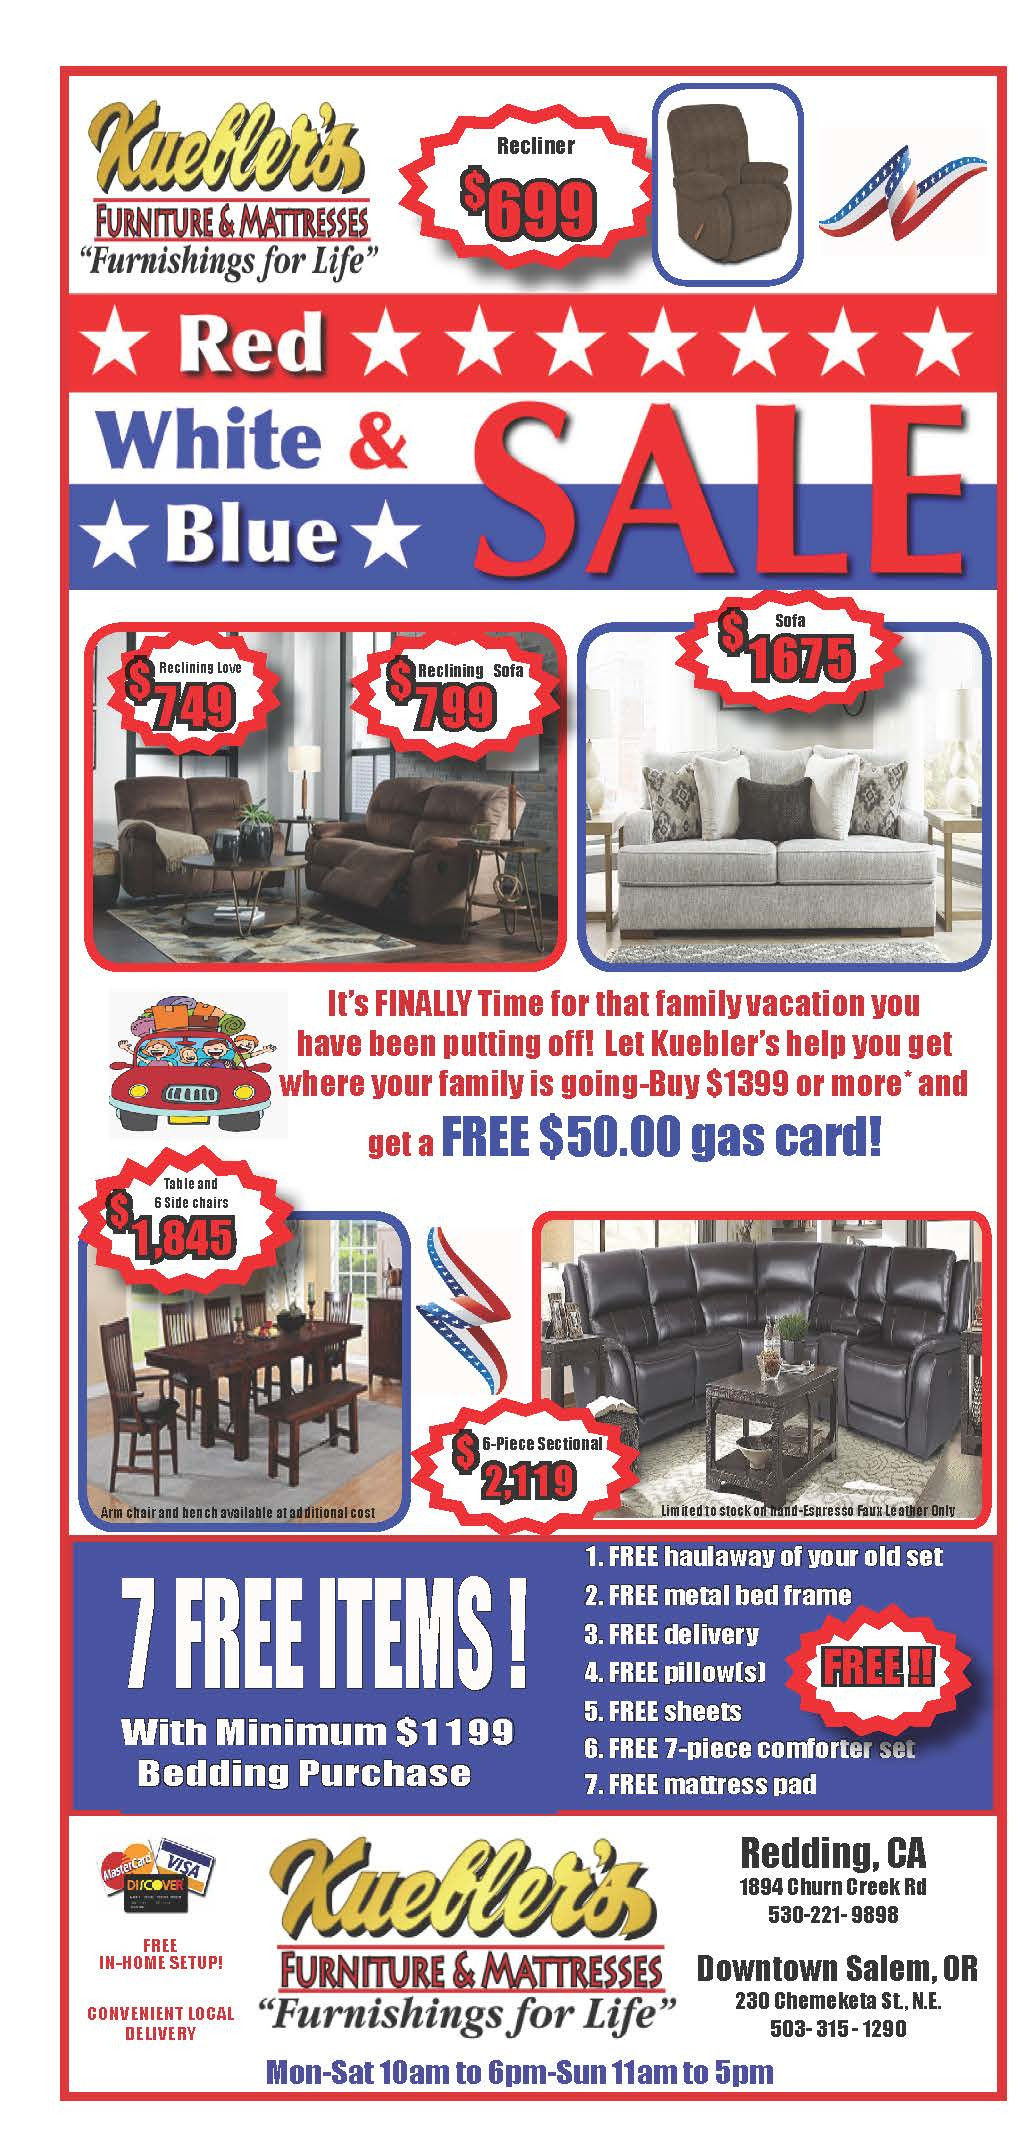 Kuebler's "Red White and Blue Sale"